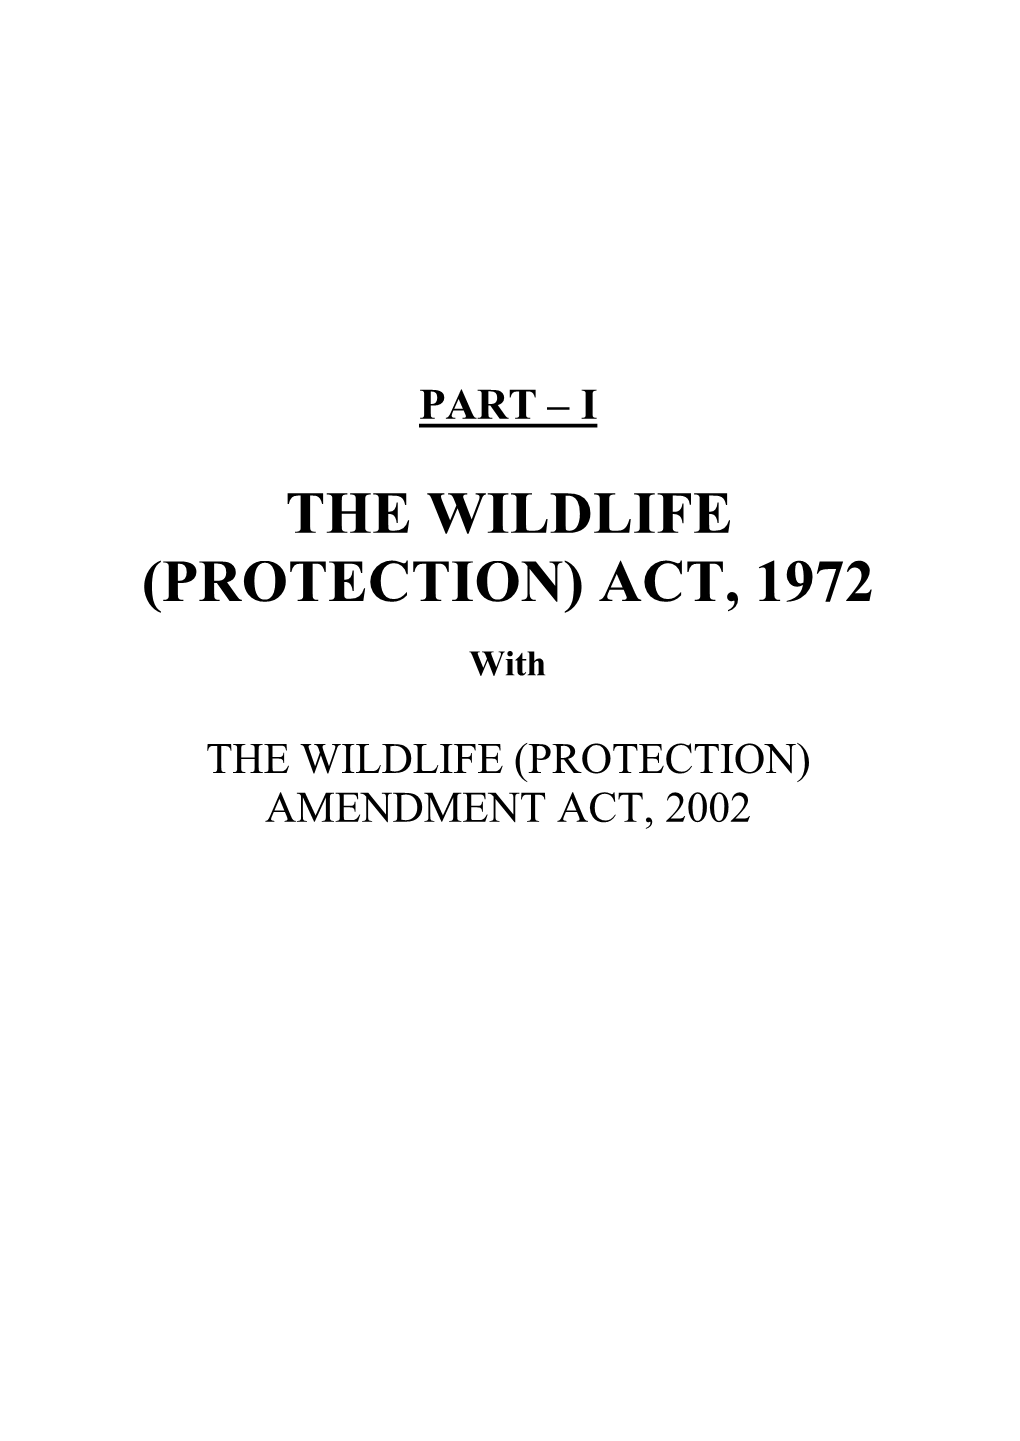 The Wildlife (Protection) Act, 1972